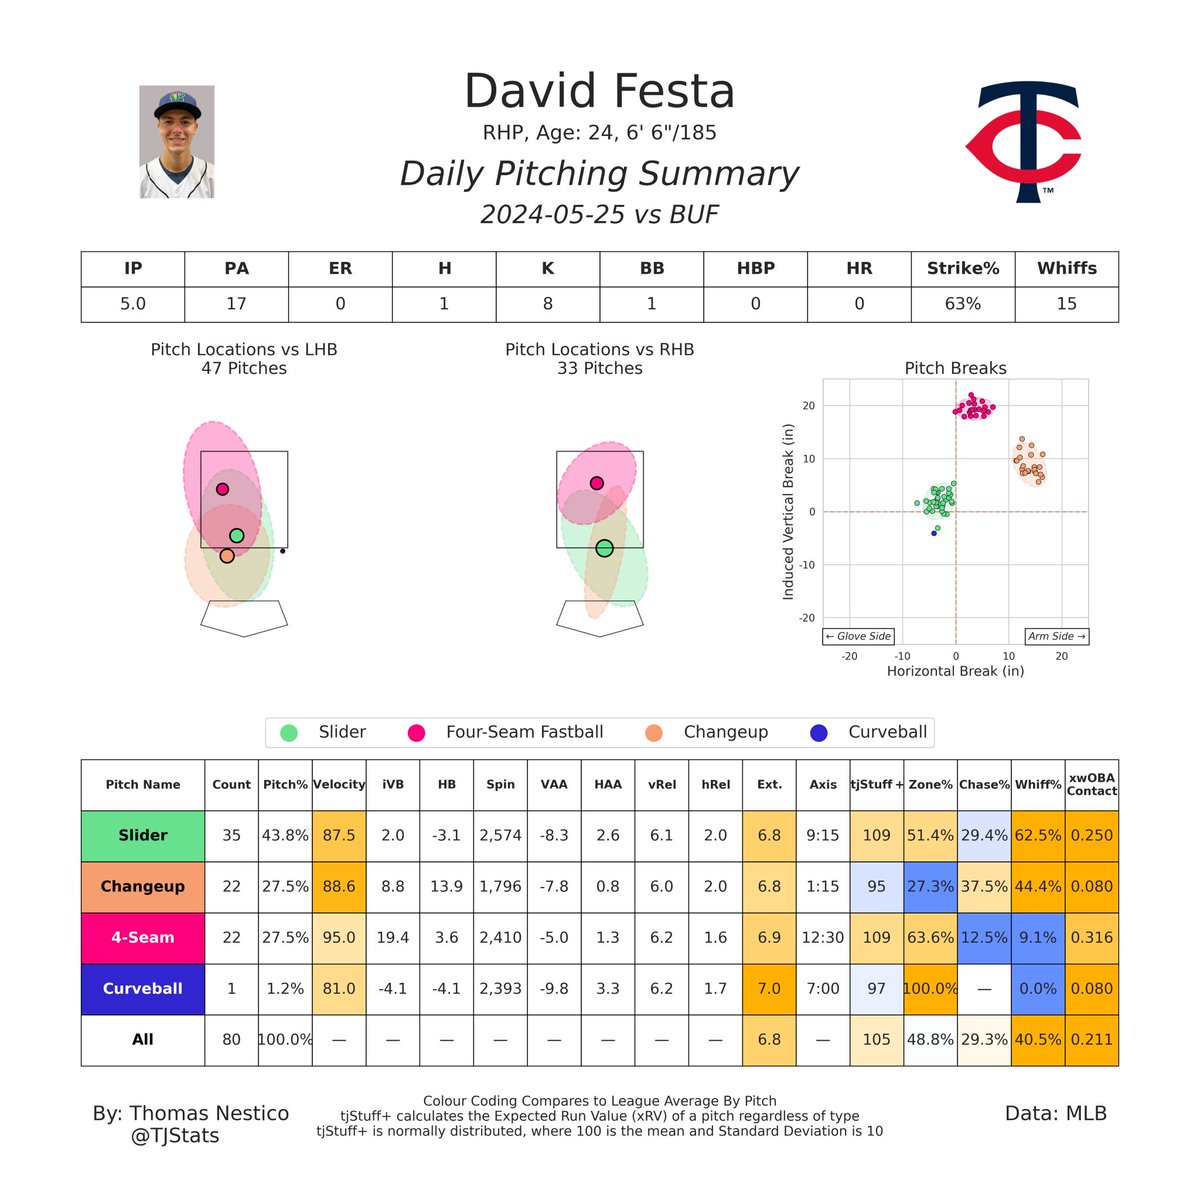 David Festa had a great start today, striking out 8 in 5.0 IP with 1 hit

Festa has been exceptional in AAA lately, displaying a fantastic 3 pitch mix. His command has been steadily improving and his changeup is a wipeout offering 

He has some of the best stuff in MiLB!